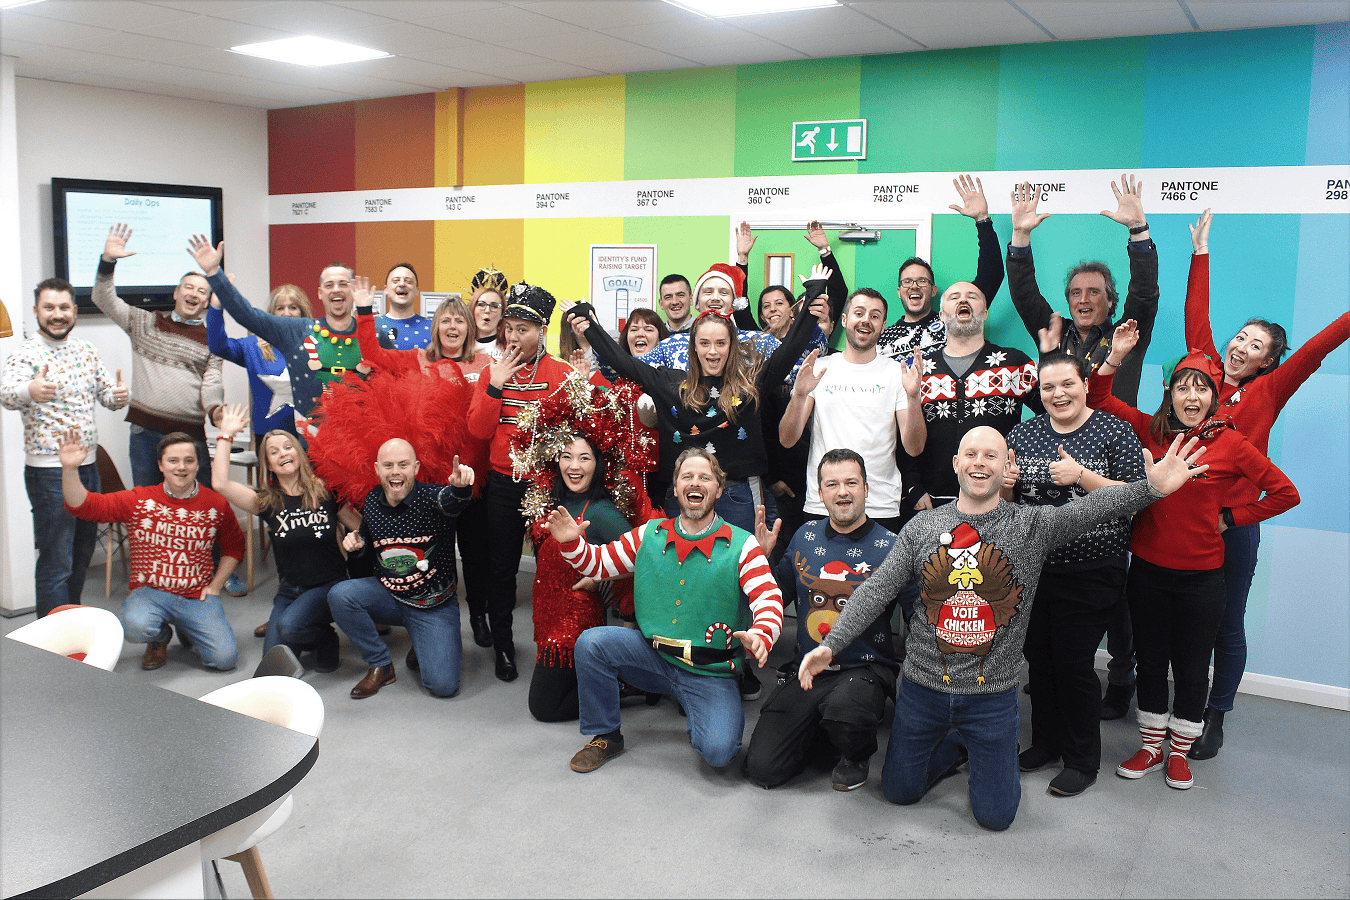 The Identity team pose in the office wearing Christmas jumpers